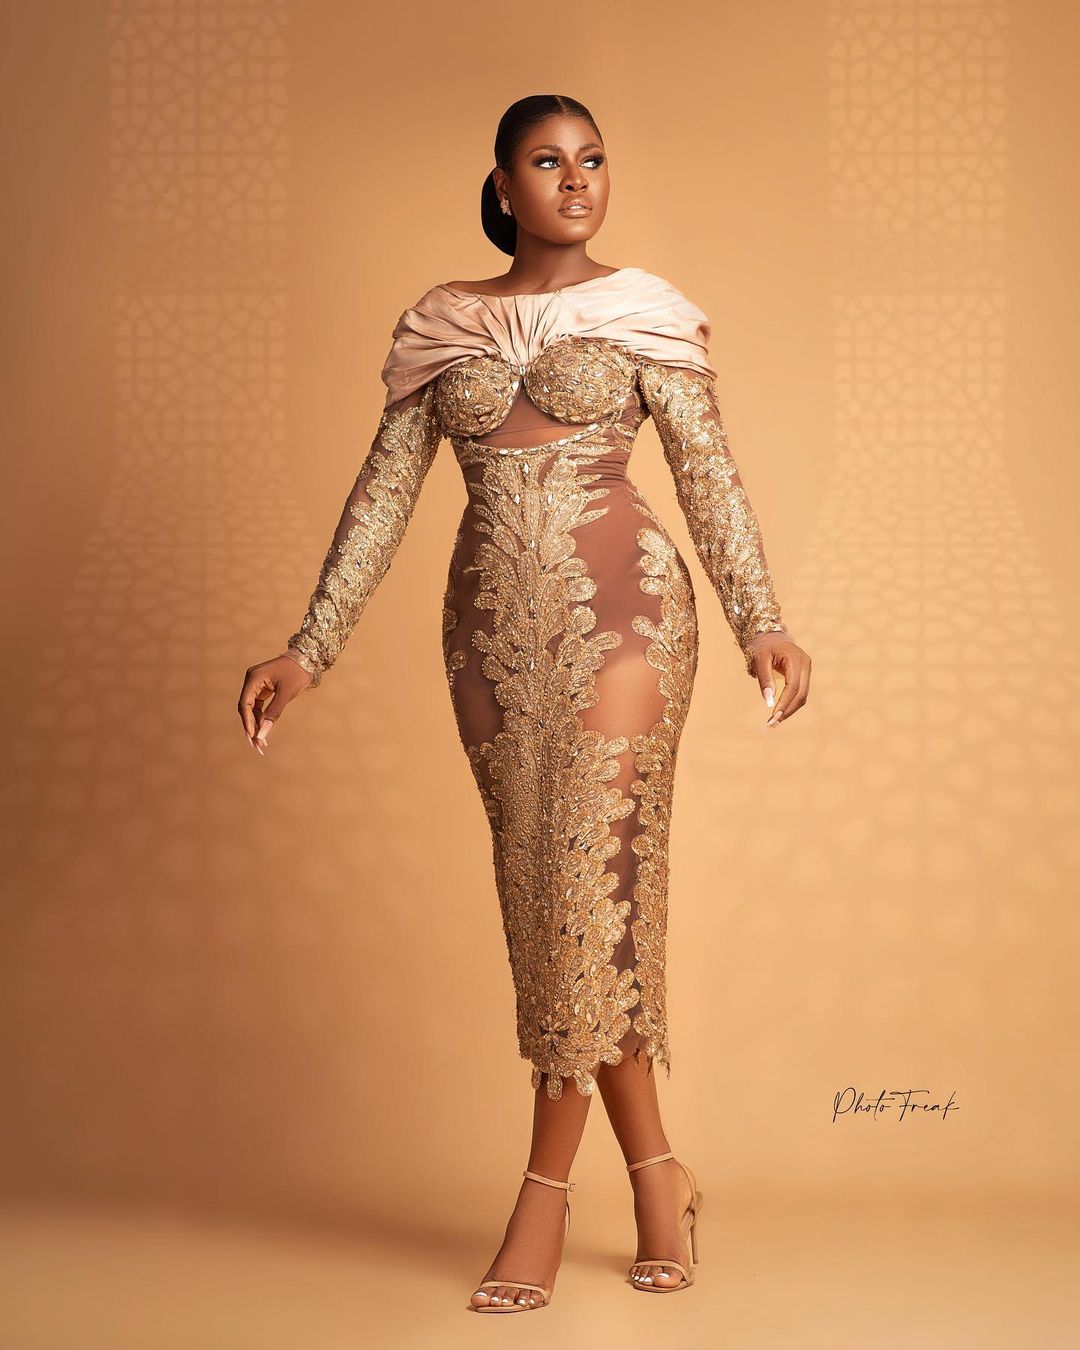 Alex Unusual Celebrated Her 25th Birthday Rocking The Most Stylish Dresses  – See All The Photos! | BN Style